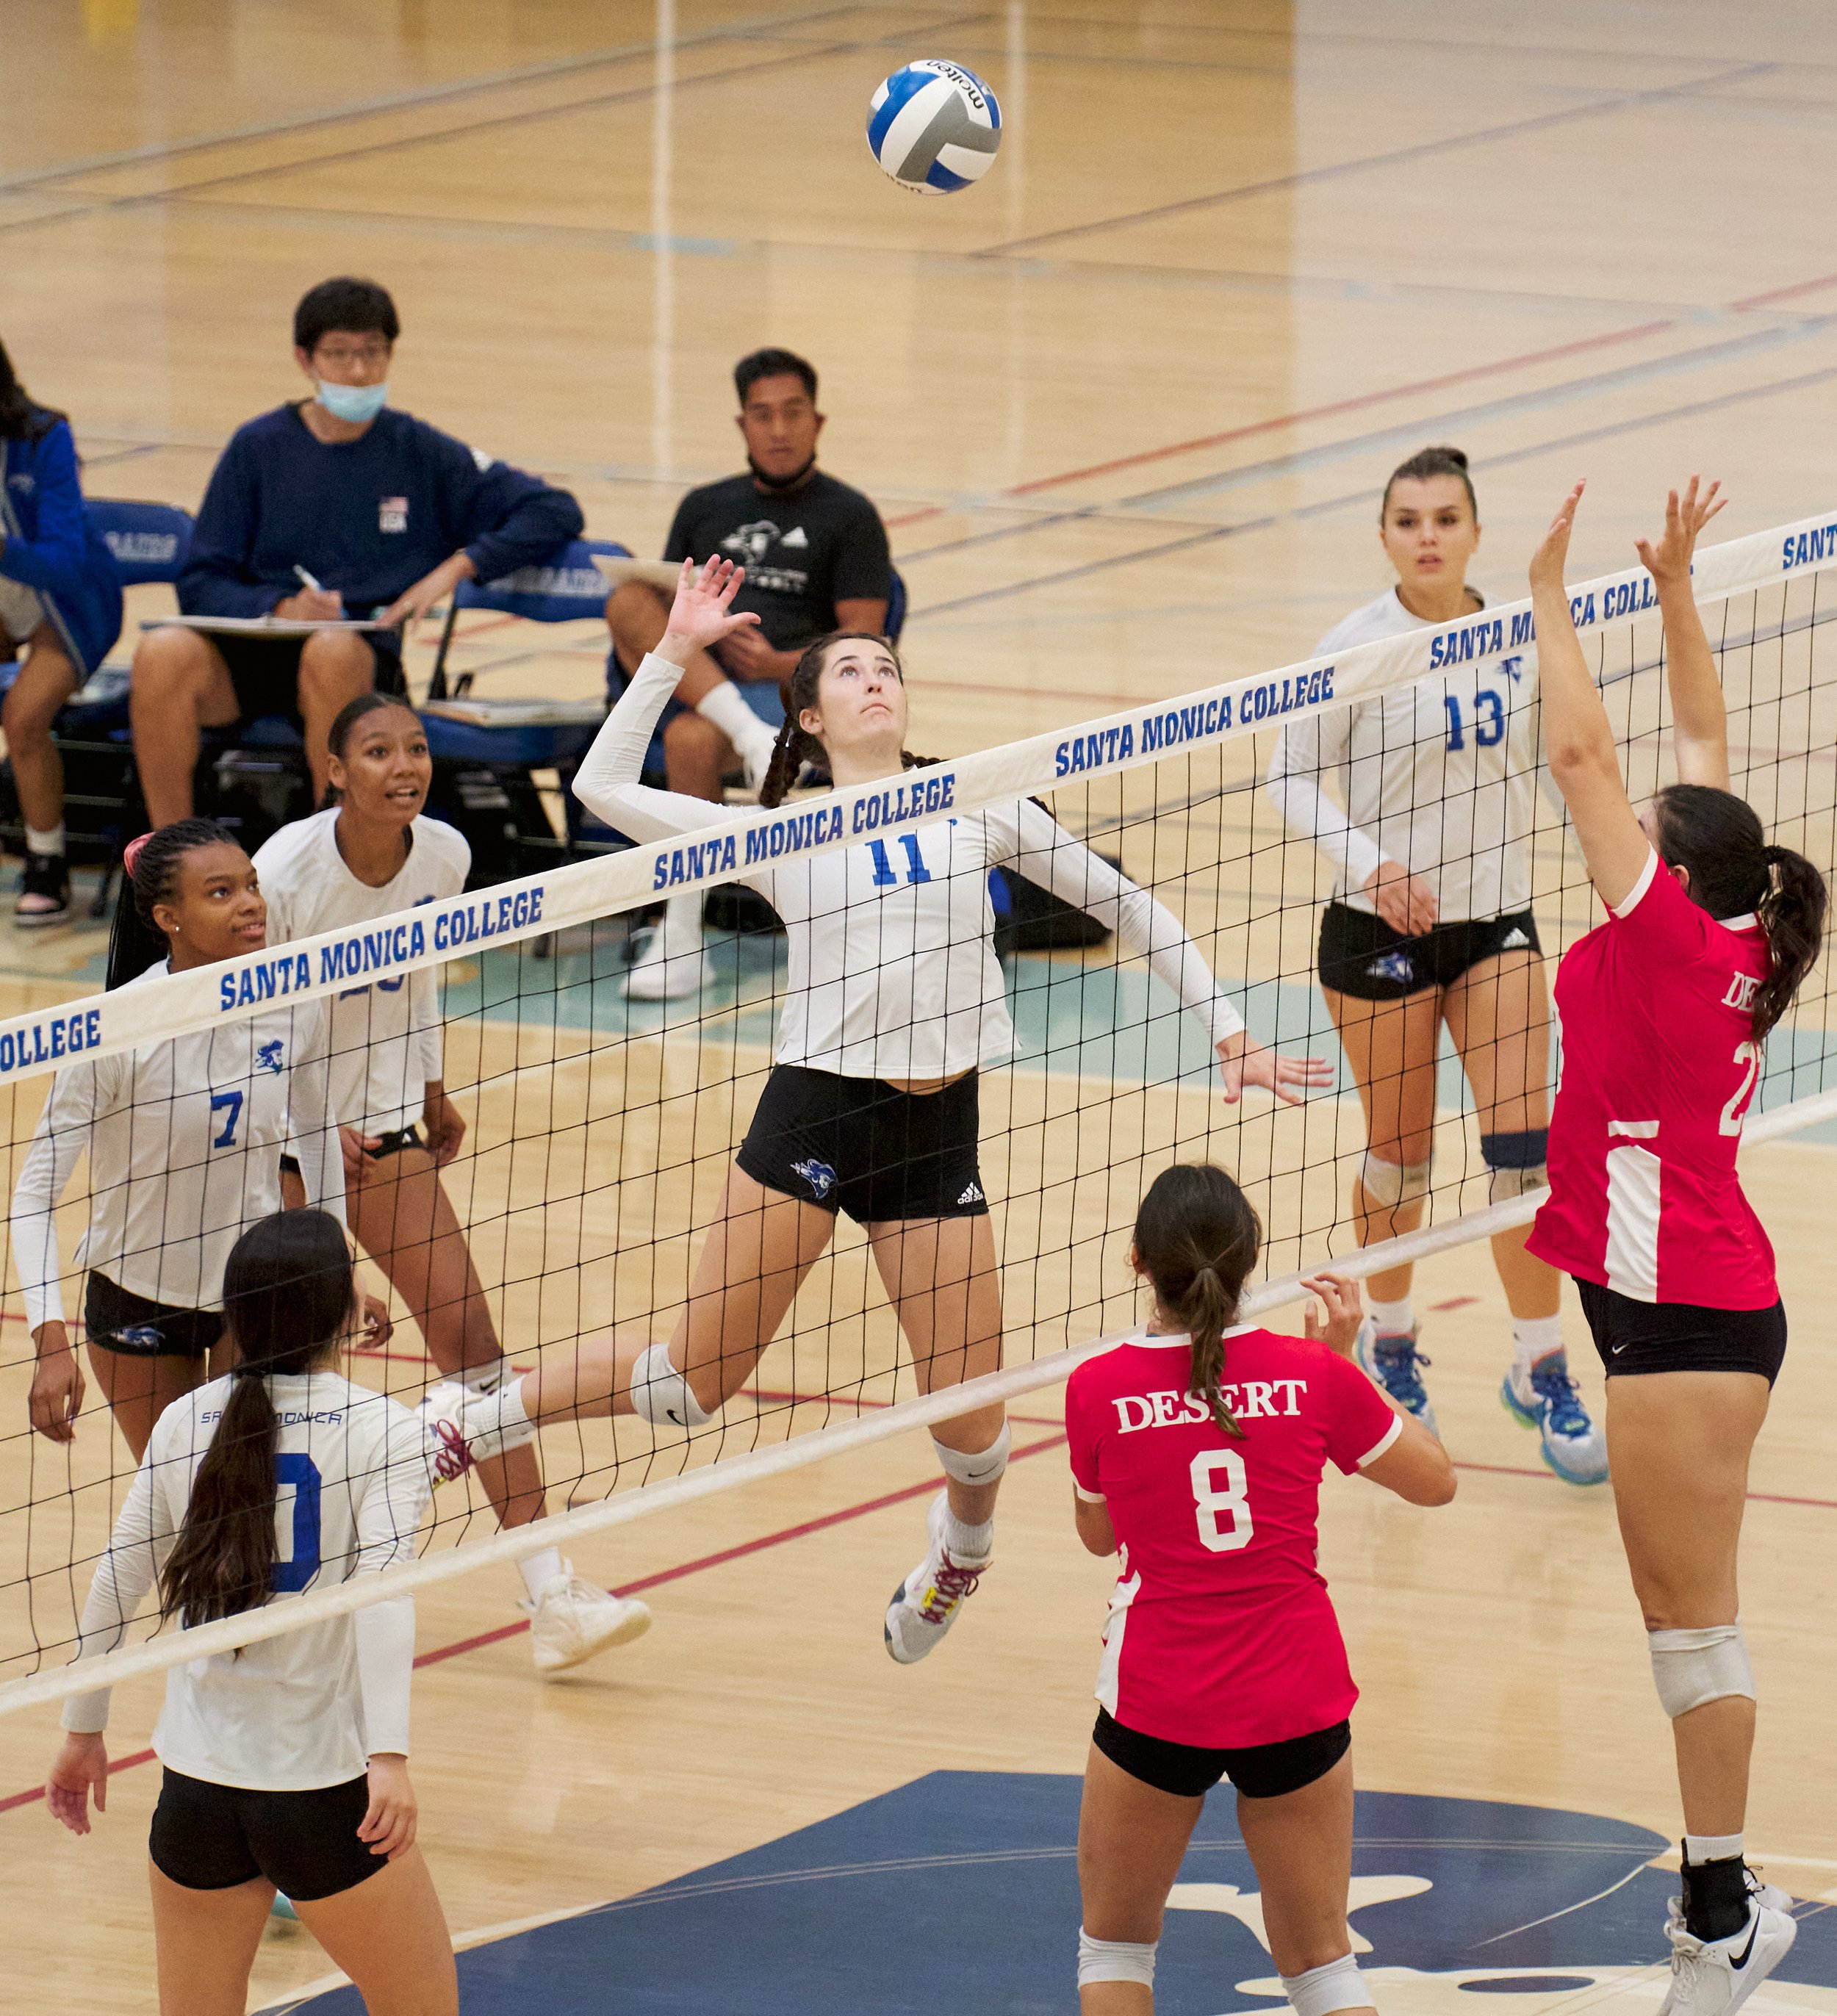  Santa Monica College Corsairs' Maiella Riva (11) and teammates during the women's volleyball match against the College of the Desert Roadrunners on Friday, October 7, 2022, at the Corsair Gym in Santa Monica, Calif. The Corsairs won 3-2. (Nicholas M